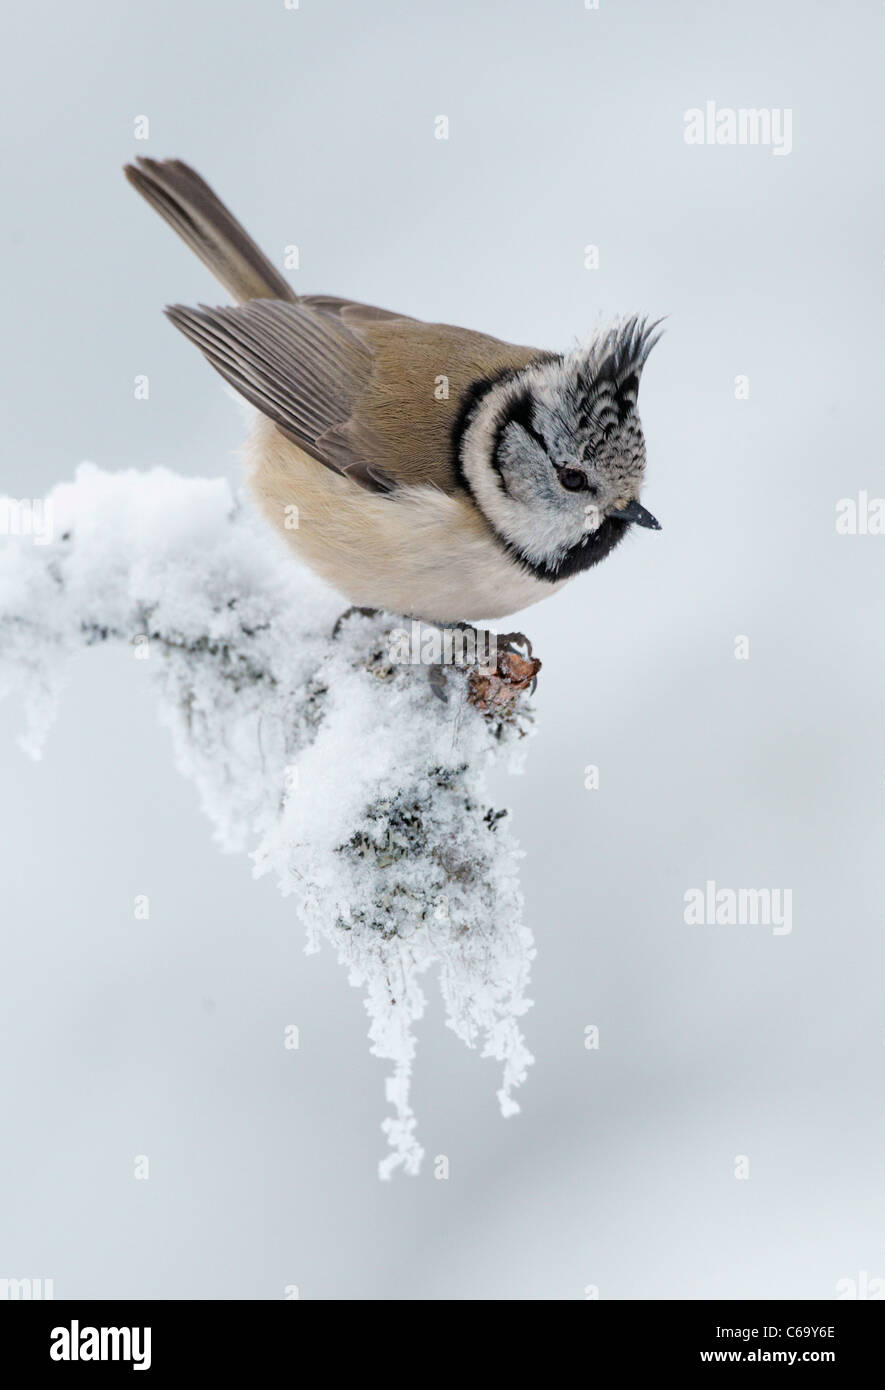 Crested Tit (Parus cristatus) perched on snowy twig. Stock Photo